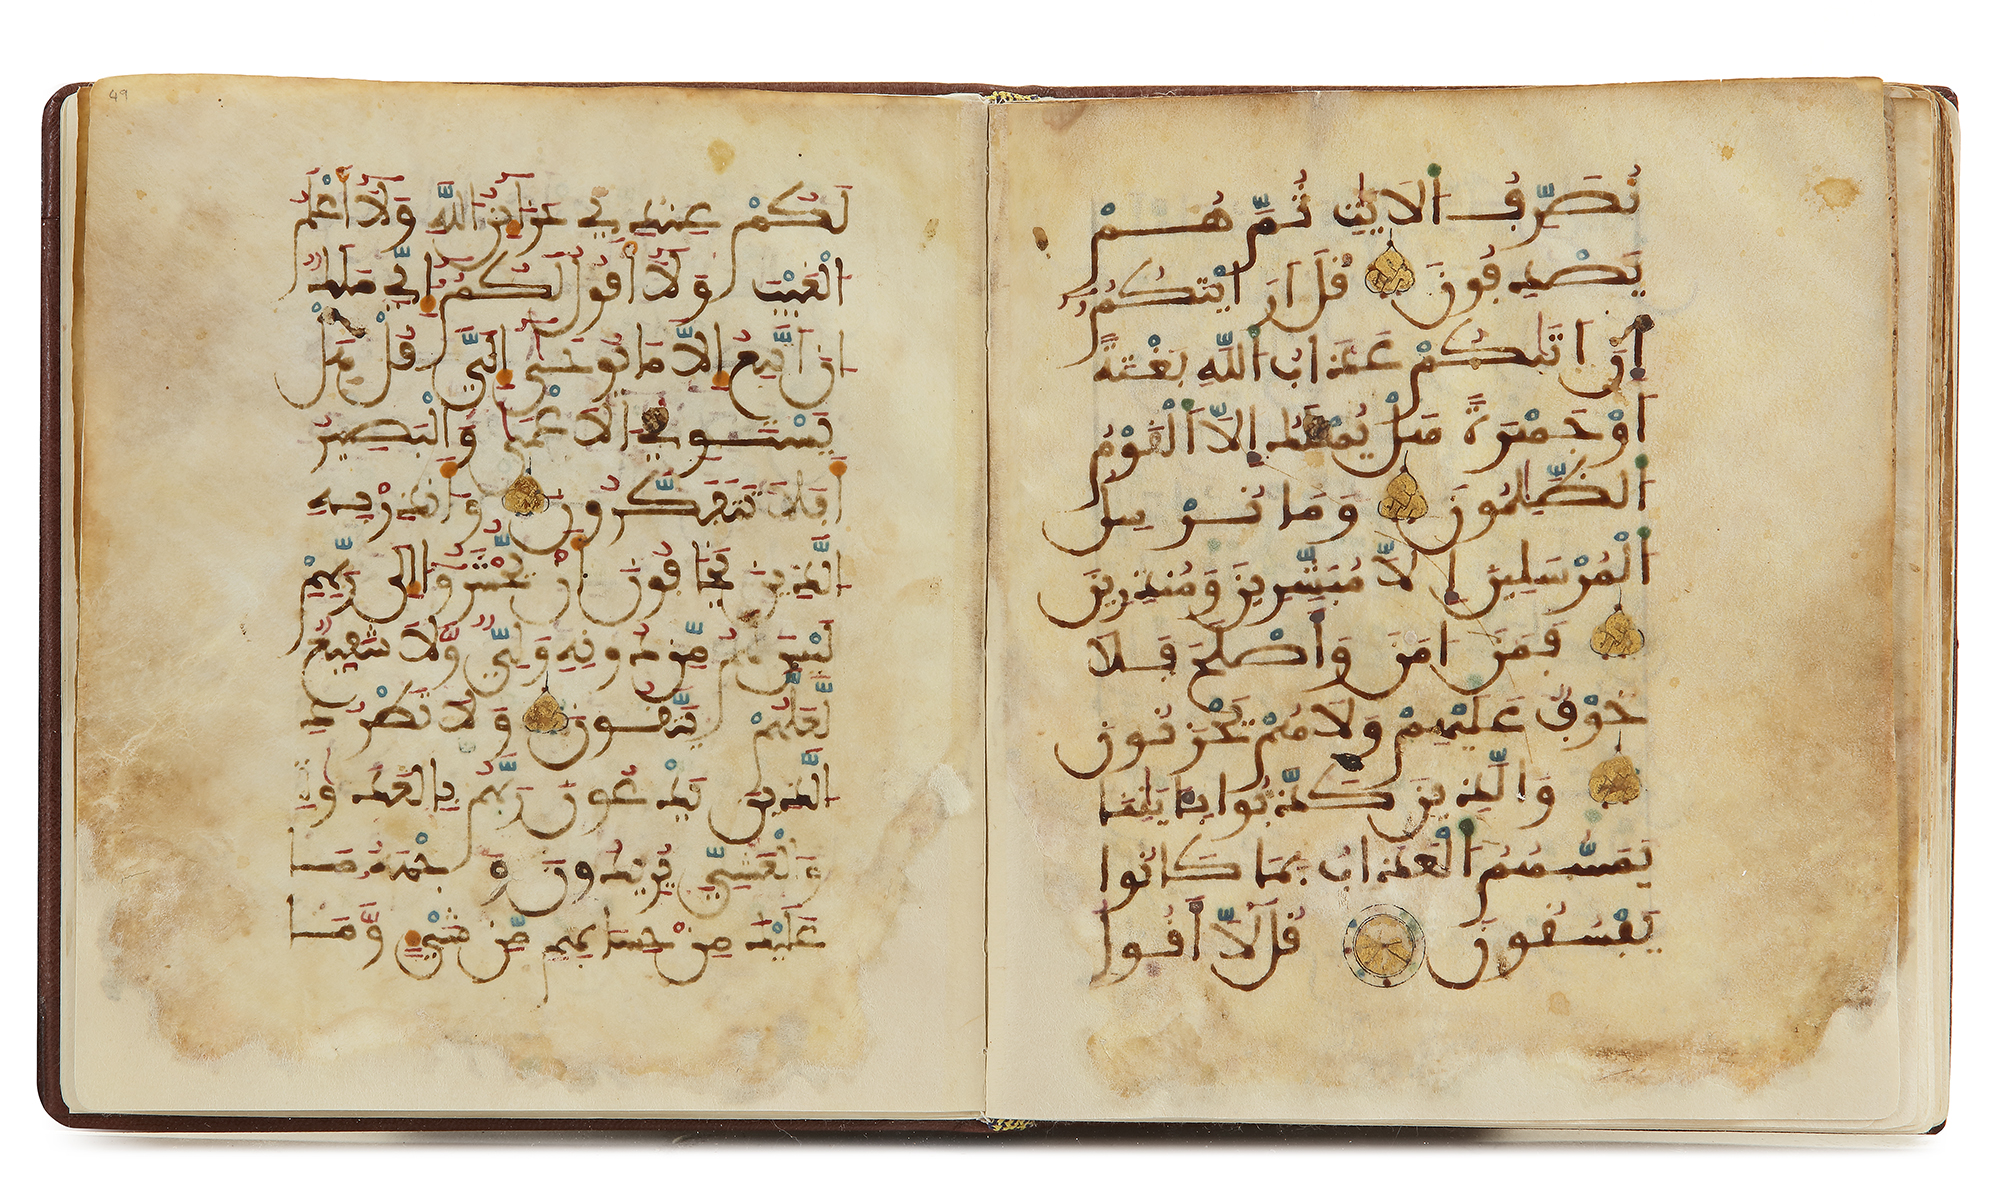 A MAGHRIBI SCRIPT QURAN SECTION, NORTH-AFRICA OR ANDALUSIA, CIRCA 13TH CENTURY - Image 2 of 4